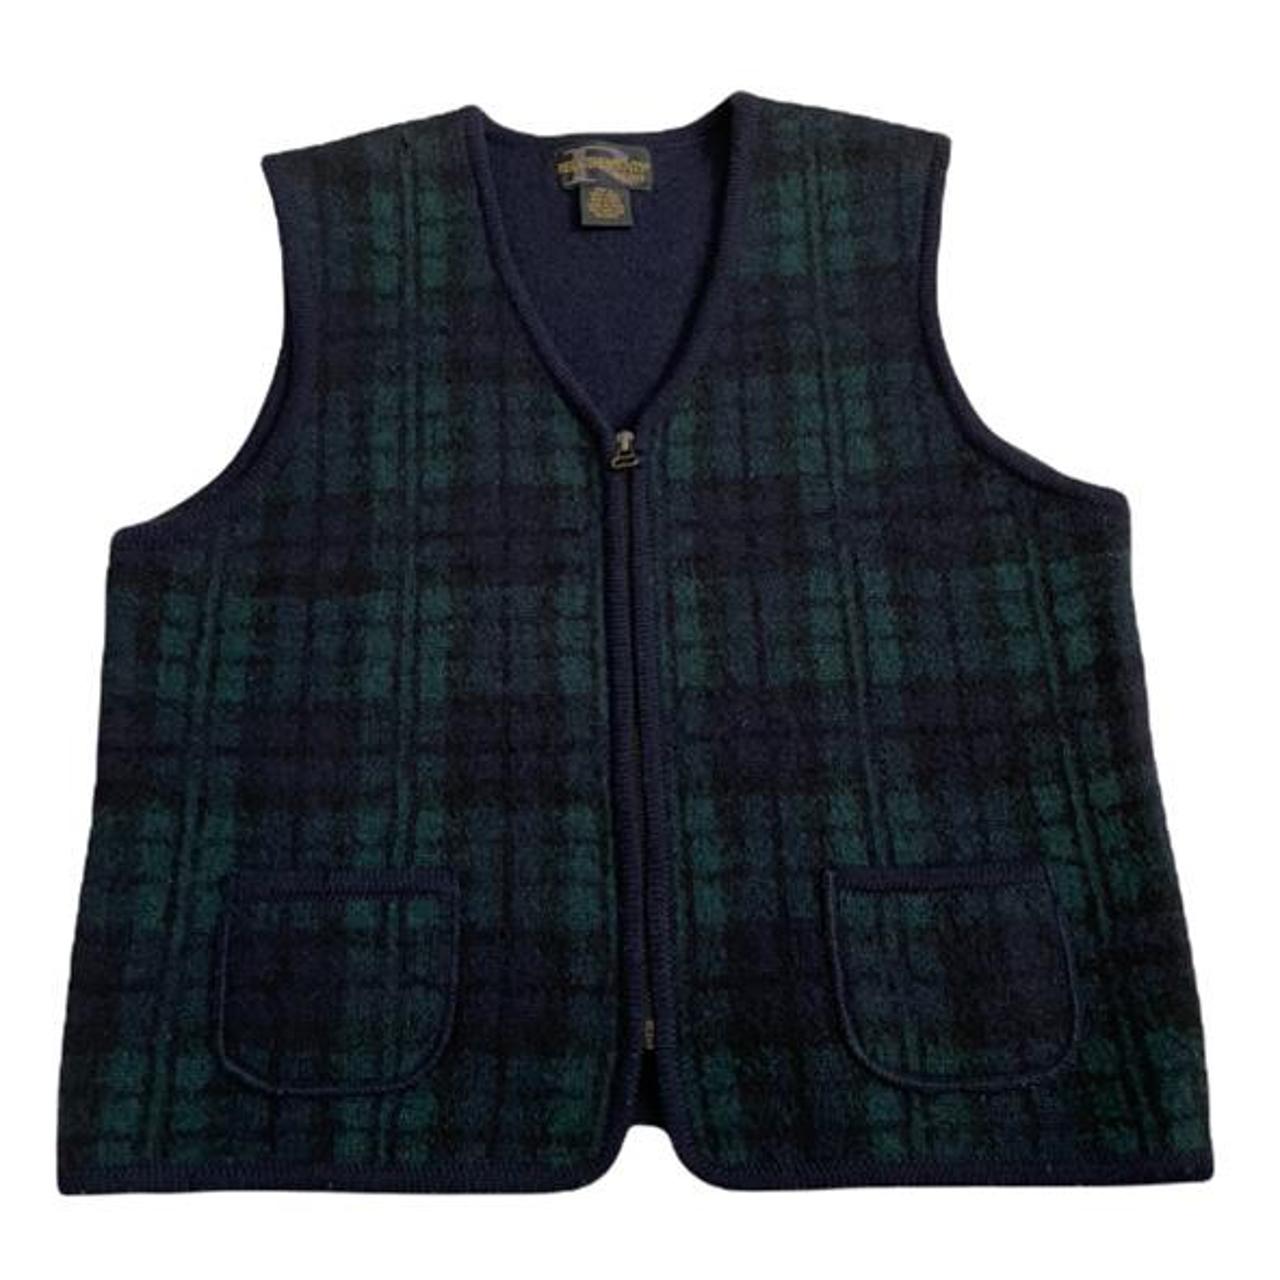 Men's Blue and Green Gilet